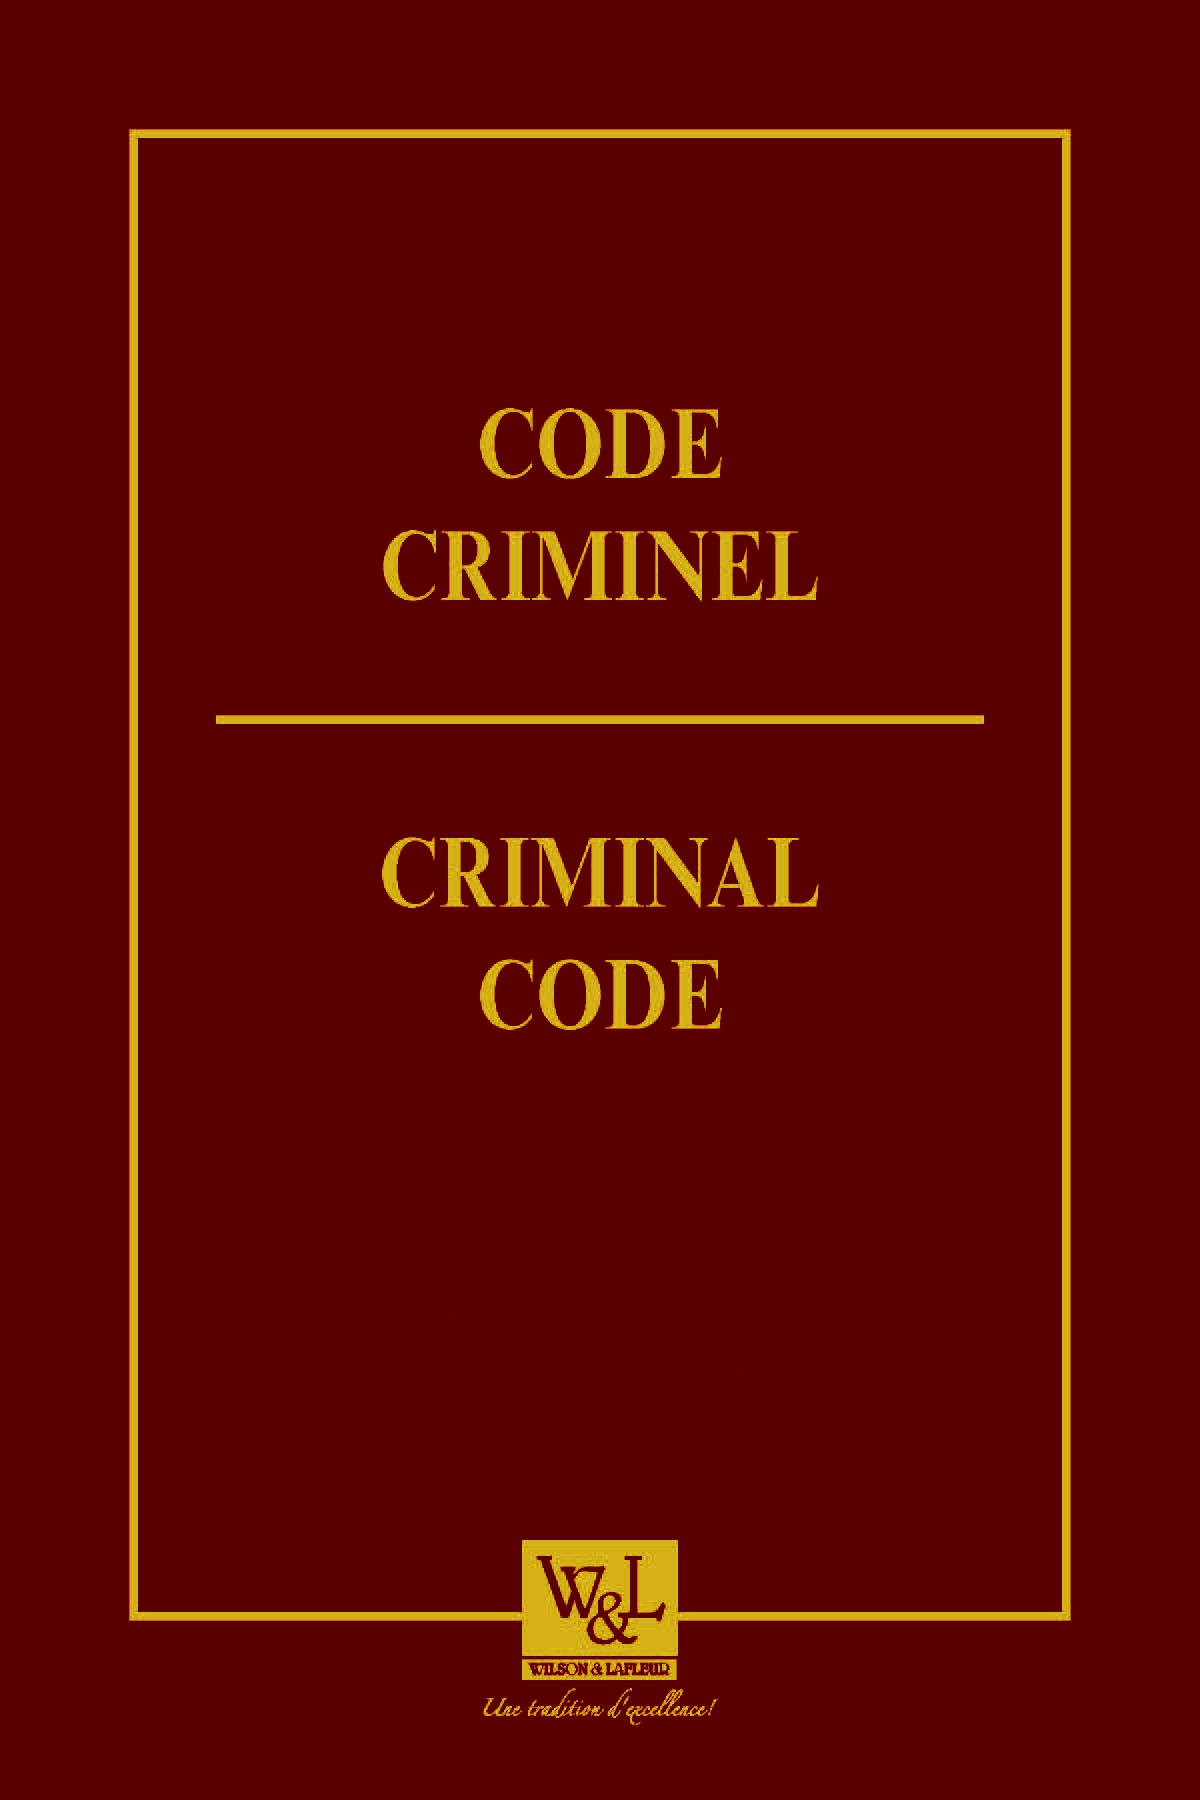 The cover of the crimal code that police use